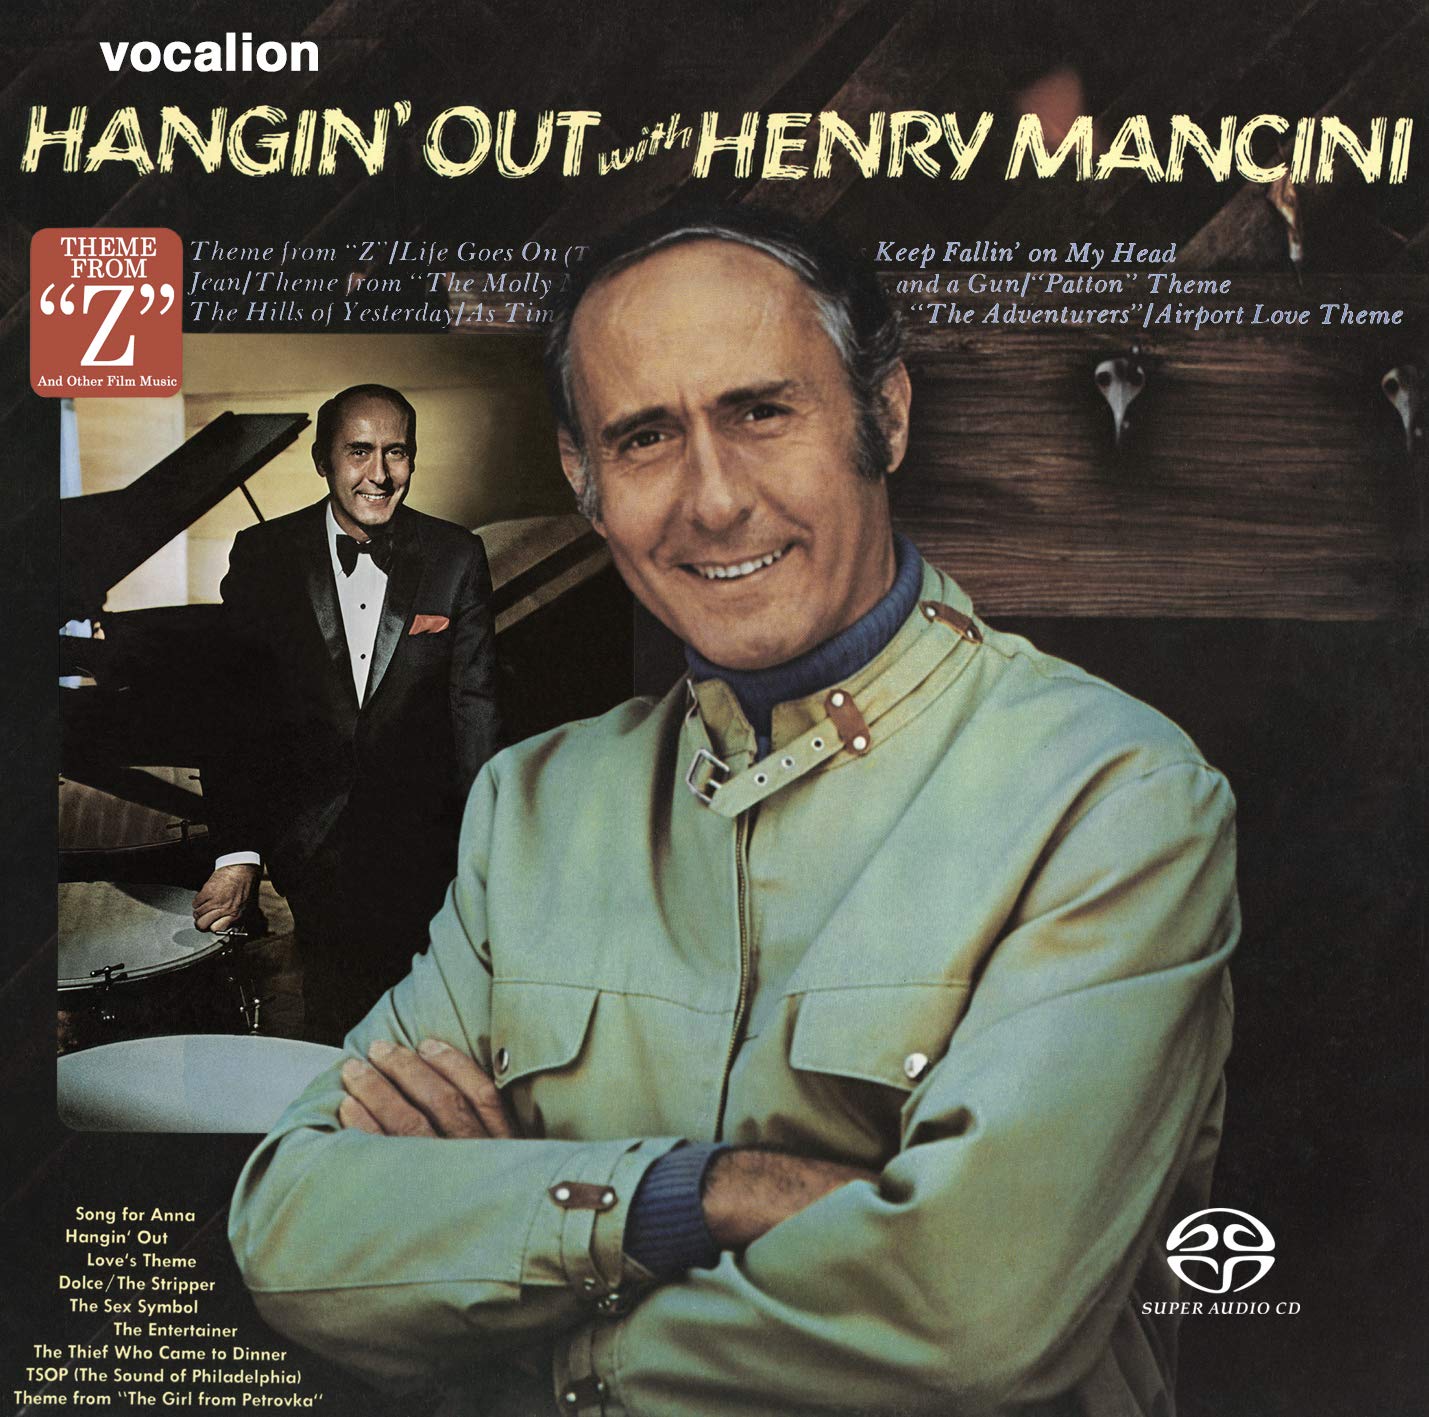 Henry Mancini - Hangin’ Out & Theme from Z (1974 & 1970) [Reissue 2019] MCH SACD ISO + FLAC 24bit/96kHz